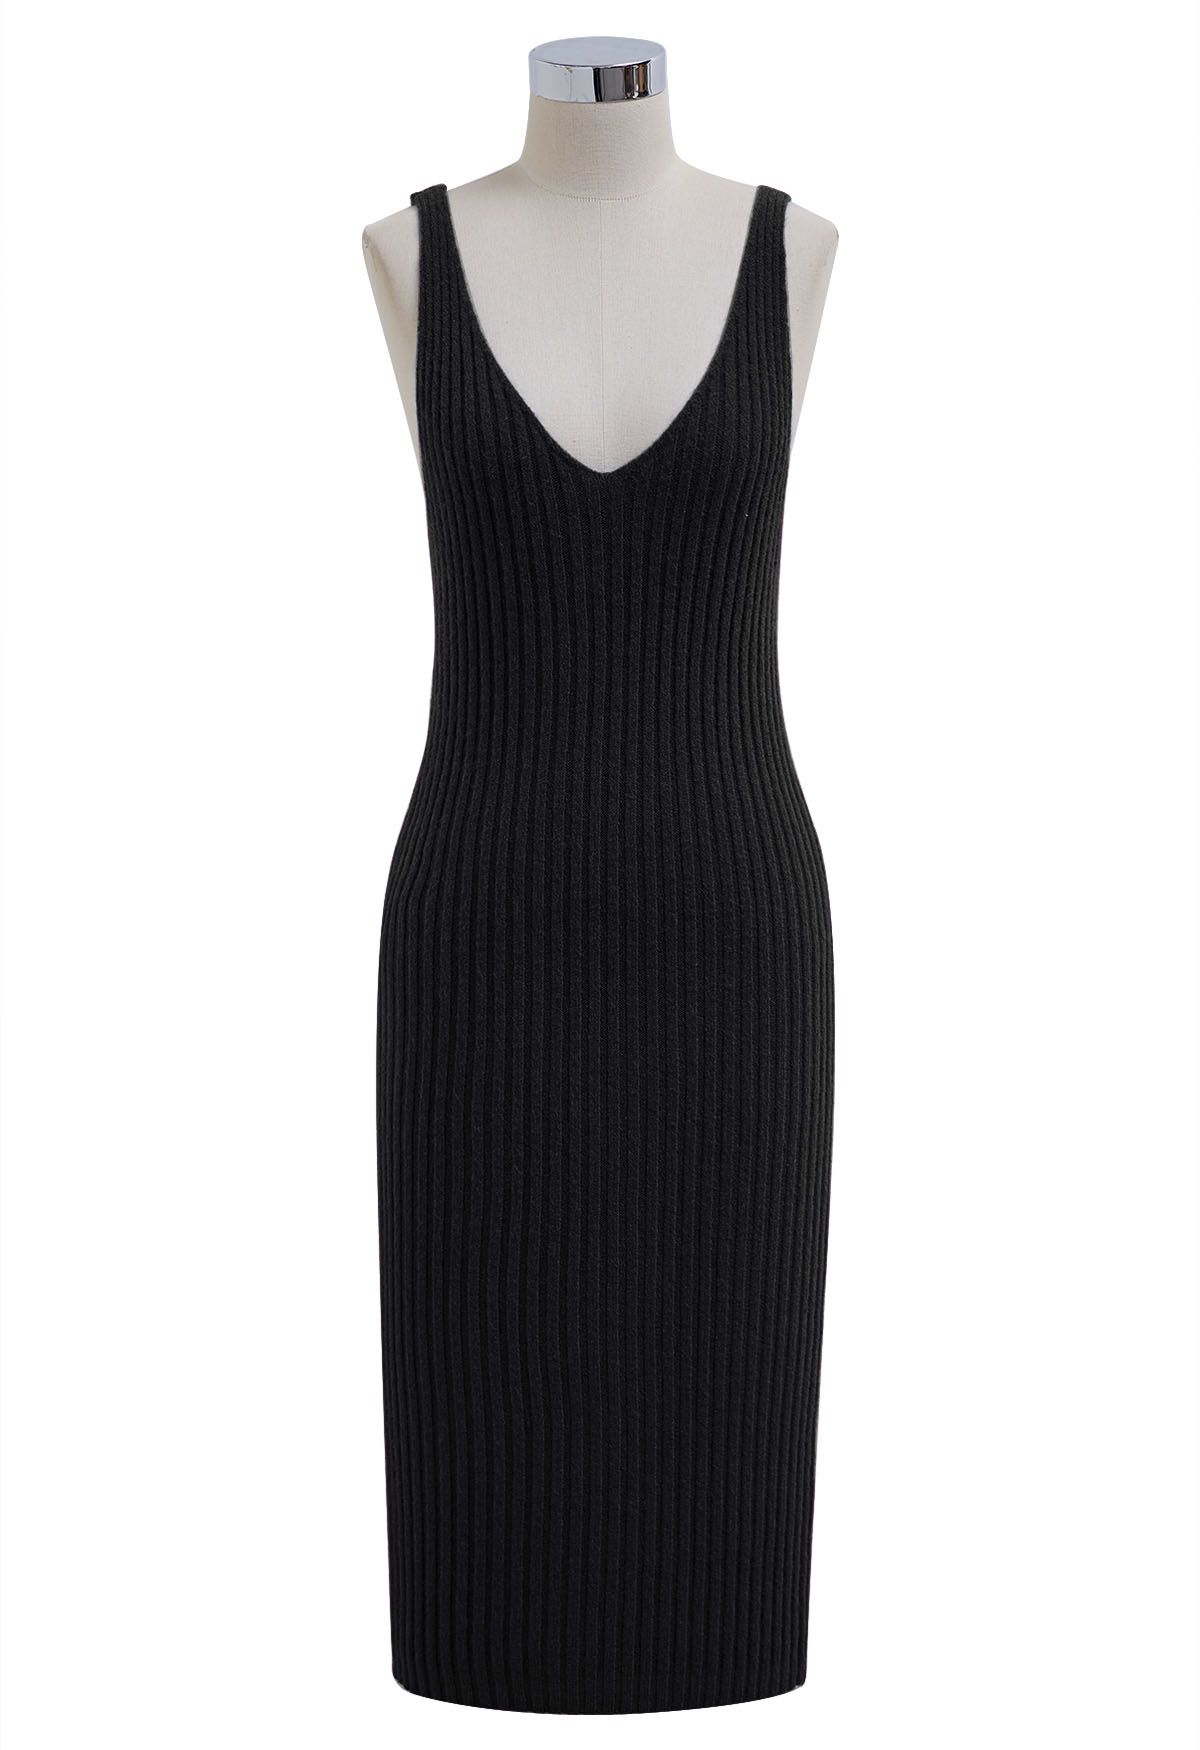 Pearl Neckline Ribbed Knit Twinset Dress in Black